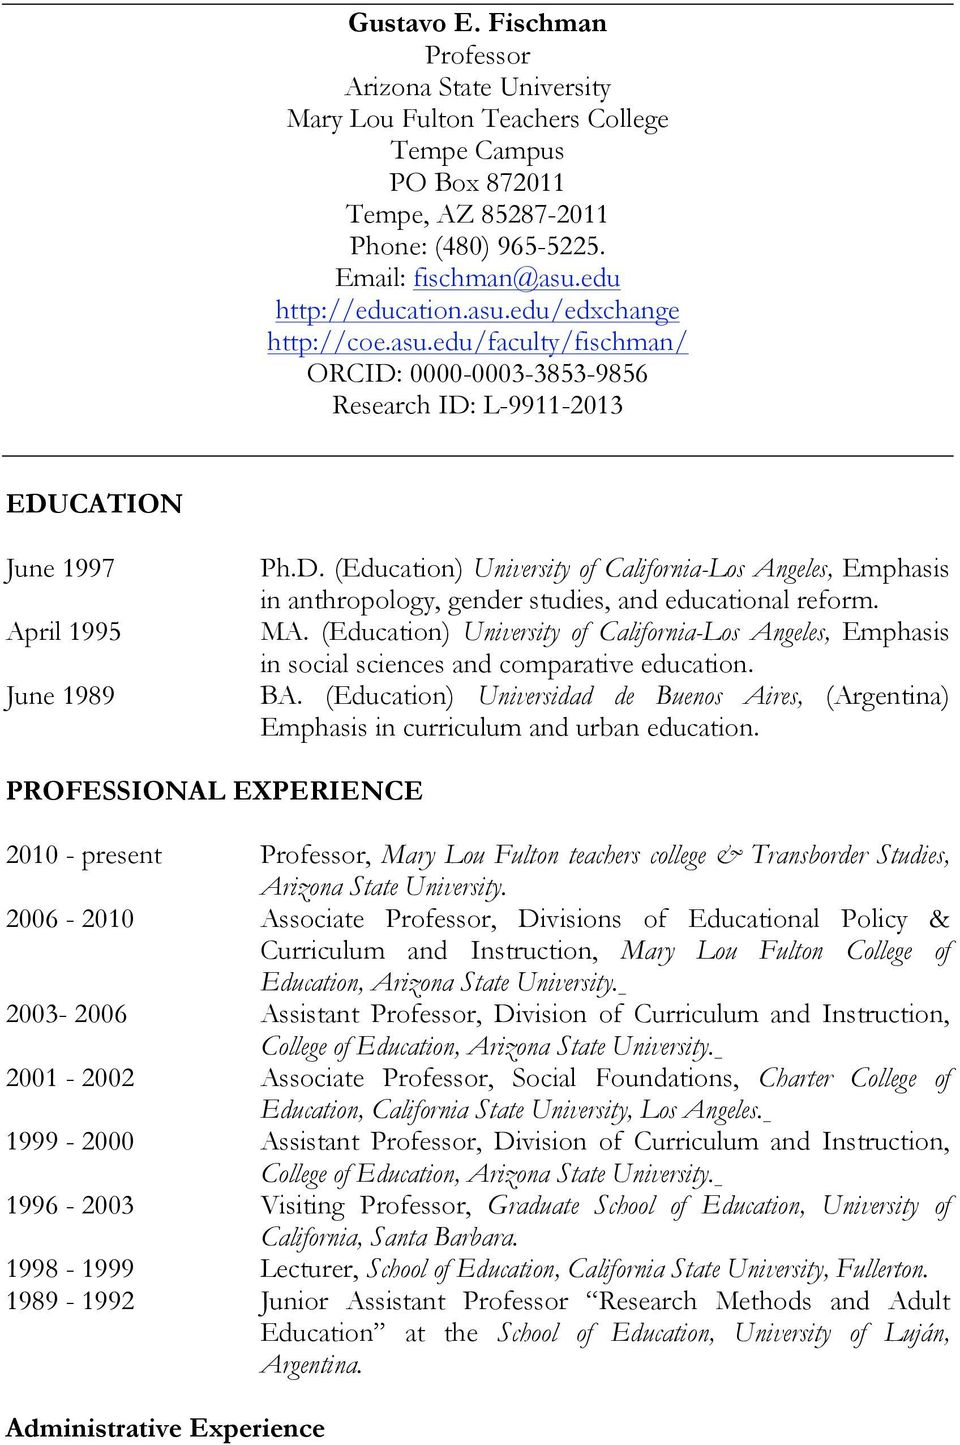 MA. (Education) University of California-Los Angeles, Emphasis in social sciences and comparative education. BA.